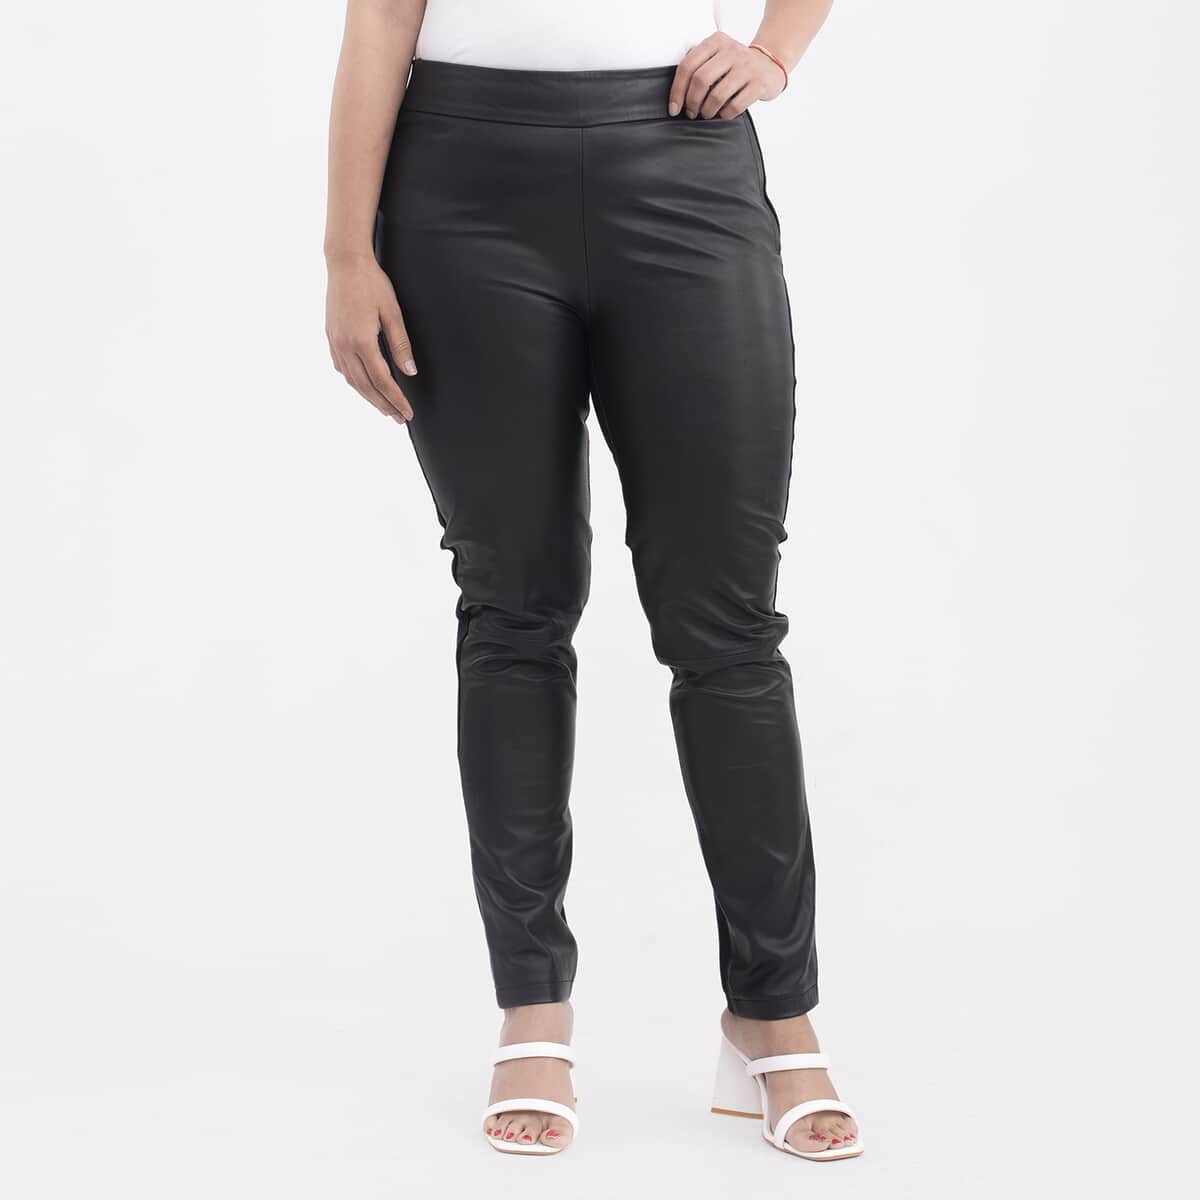 Tamsy Black Genuine Lamb Leather With Back Ponte Knit Legging - 3X image number 0